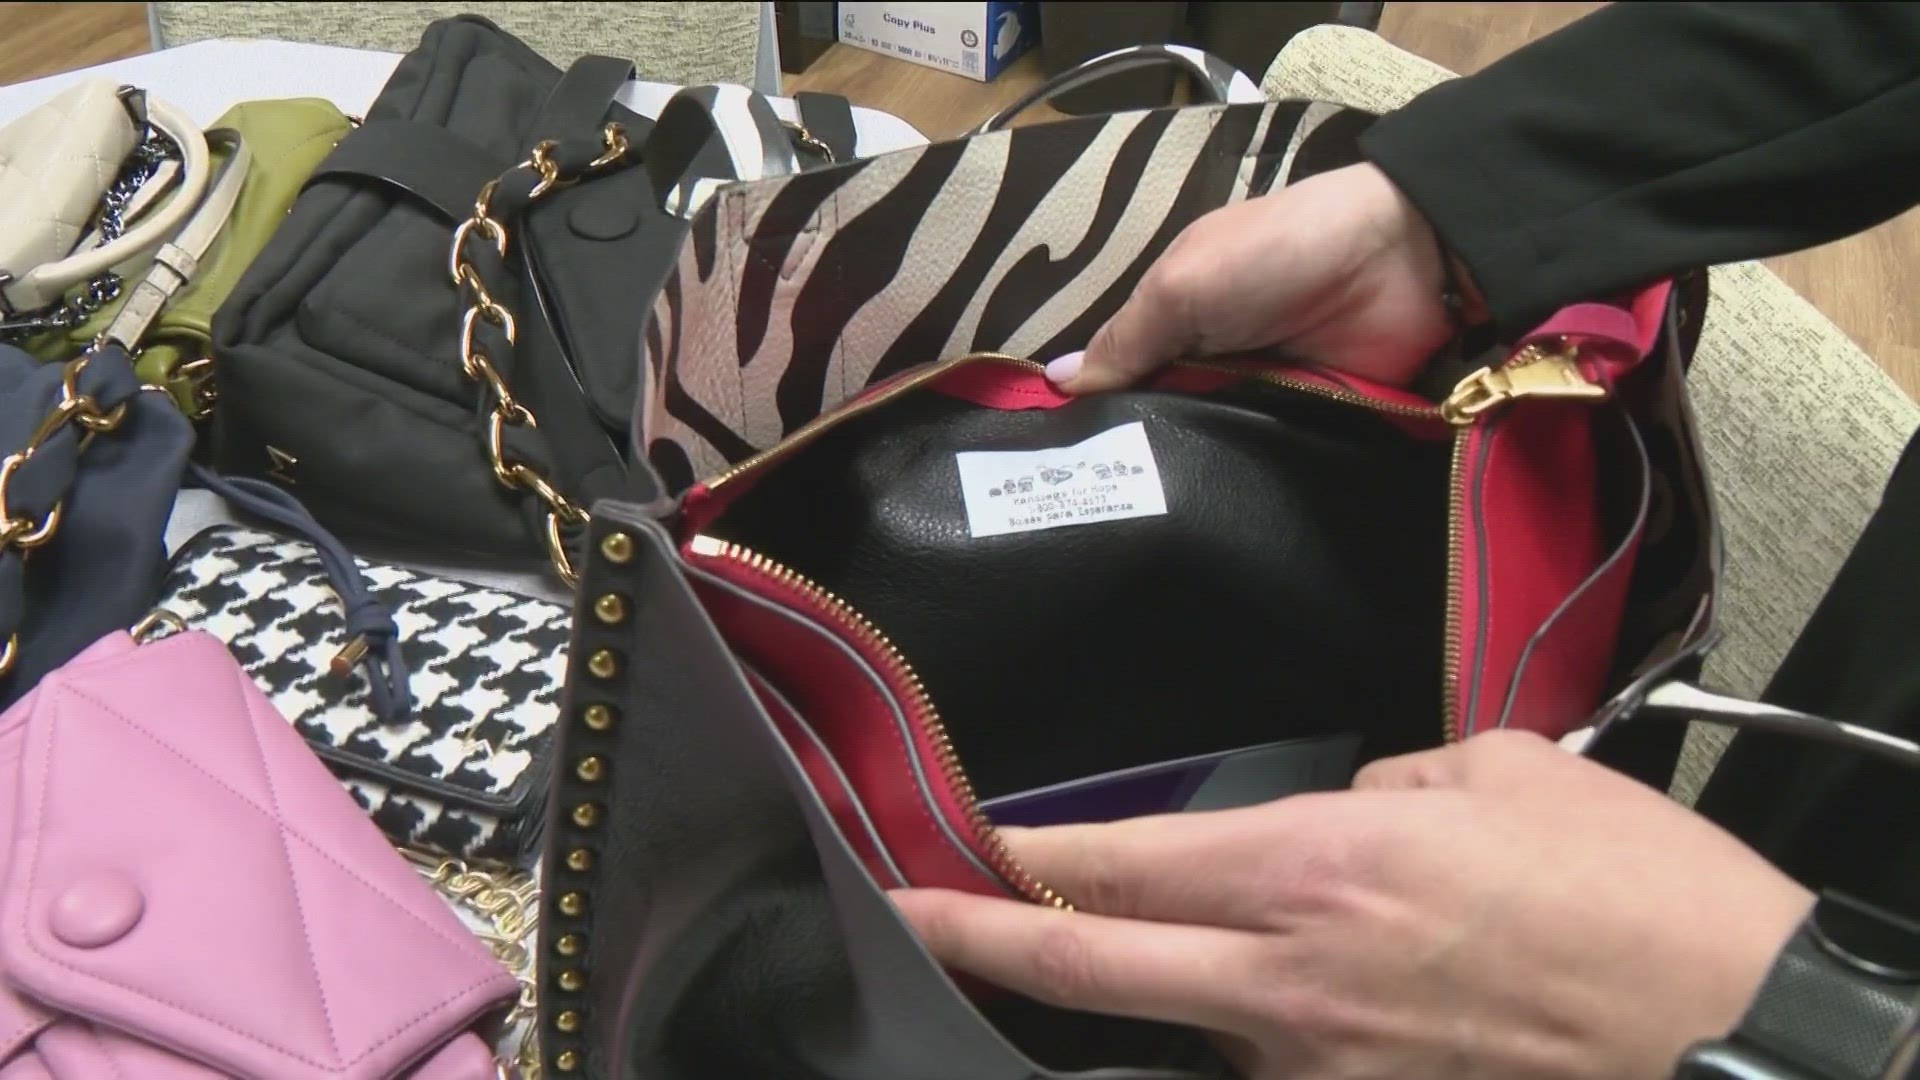 The bags are being collected throughout Central Texas and will pass them out ahead of Mother's Day.